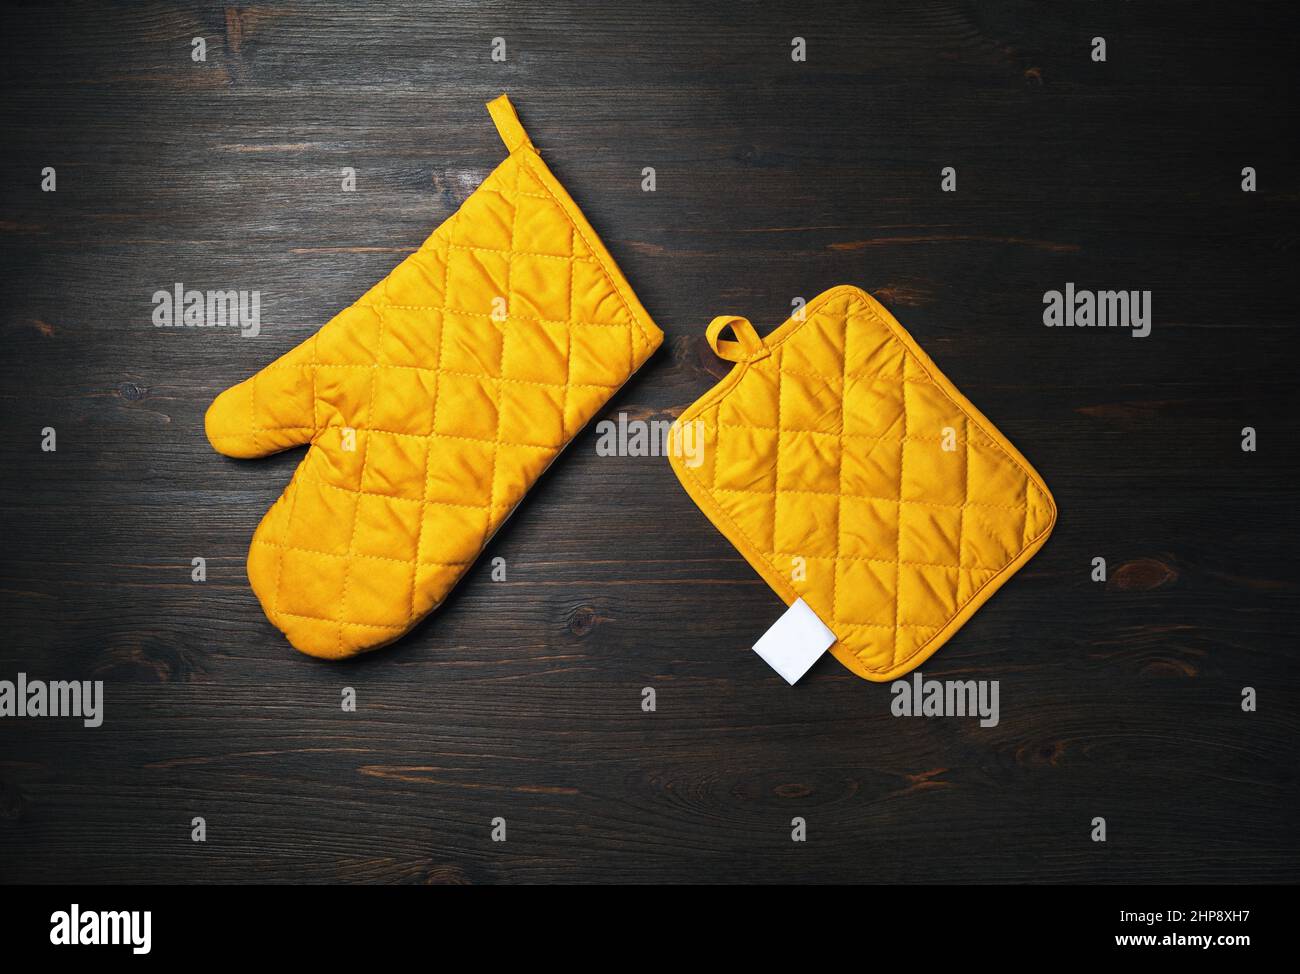 https://c8.alamy.com/comp/2HP8XH7/oven-mitt-and-potholder-on-wooden-background-kitchen-accessory-cooking-mitten-oven-glove-flat-lay-2HP8XH7.jpg